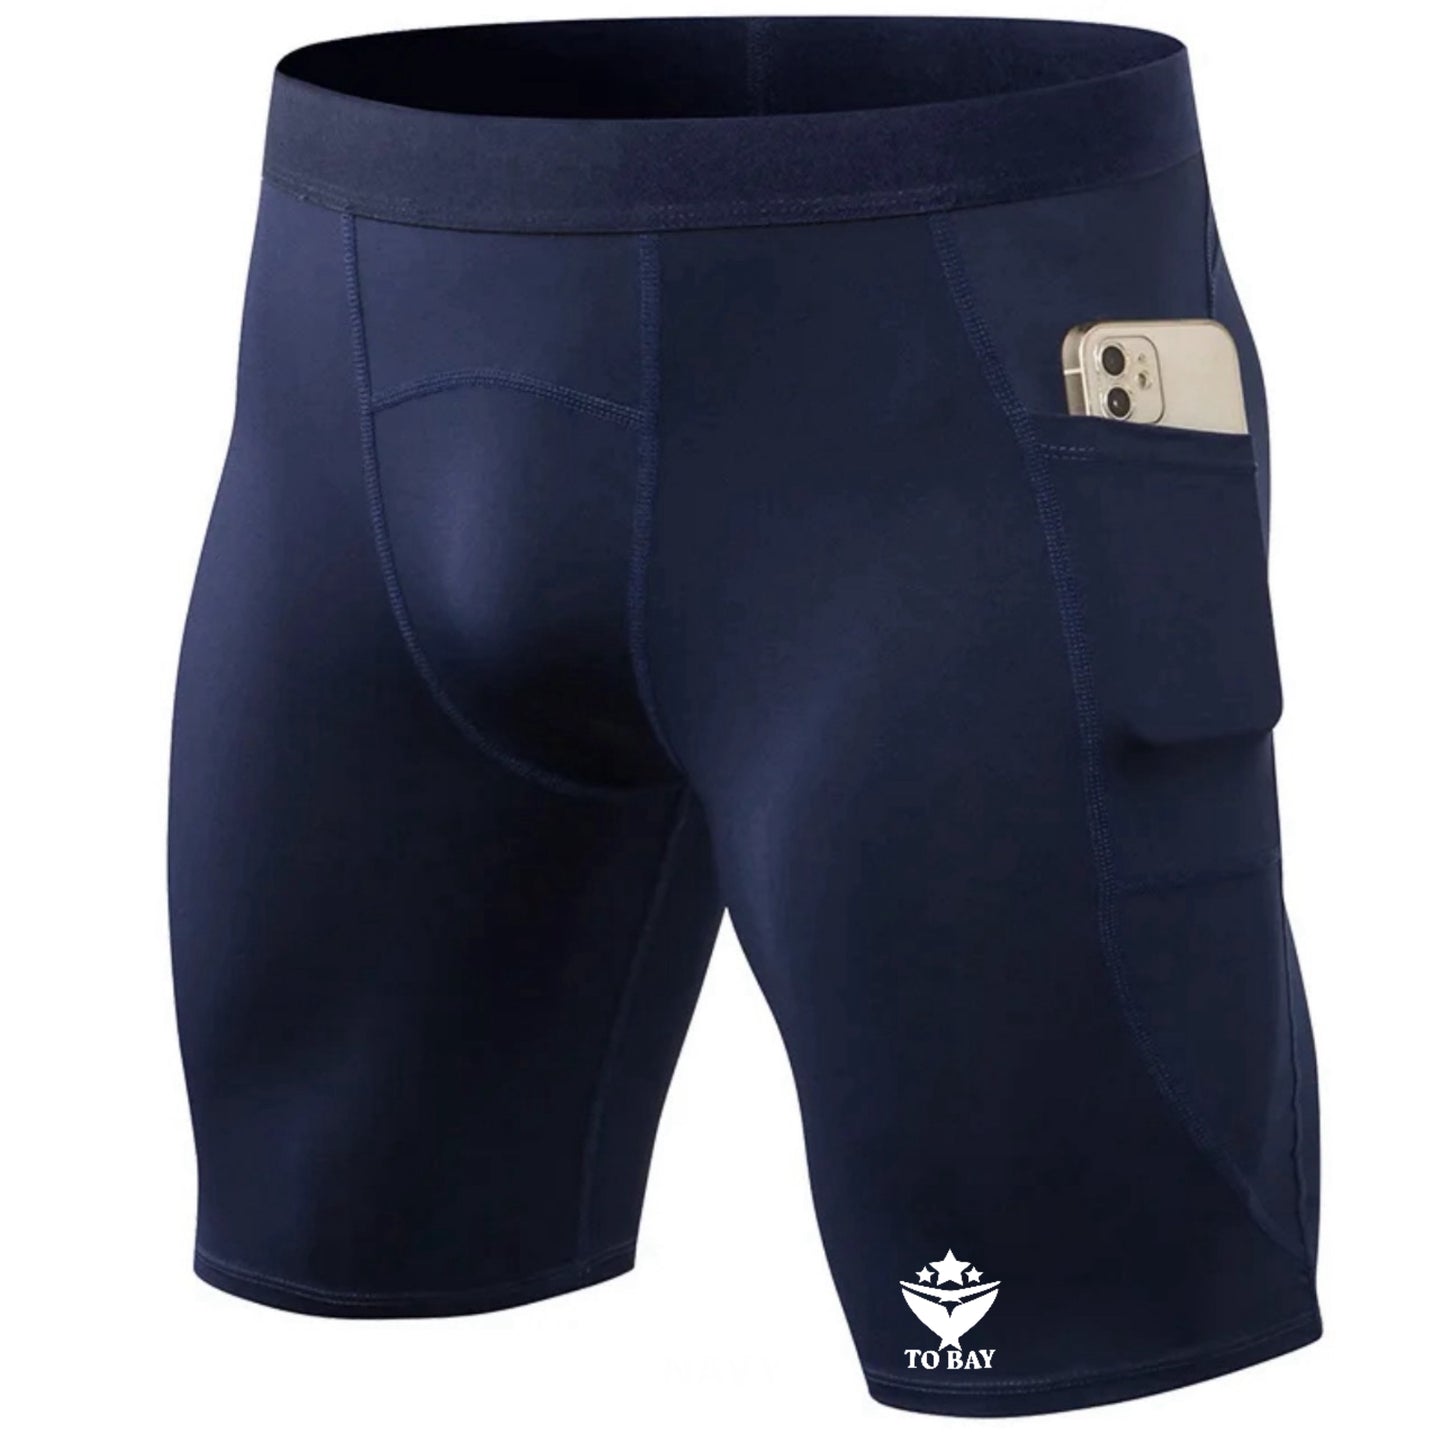 TO BAY Pro Compression Shorts